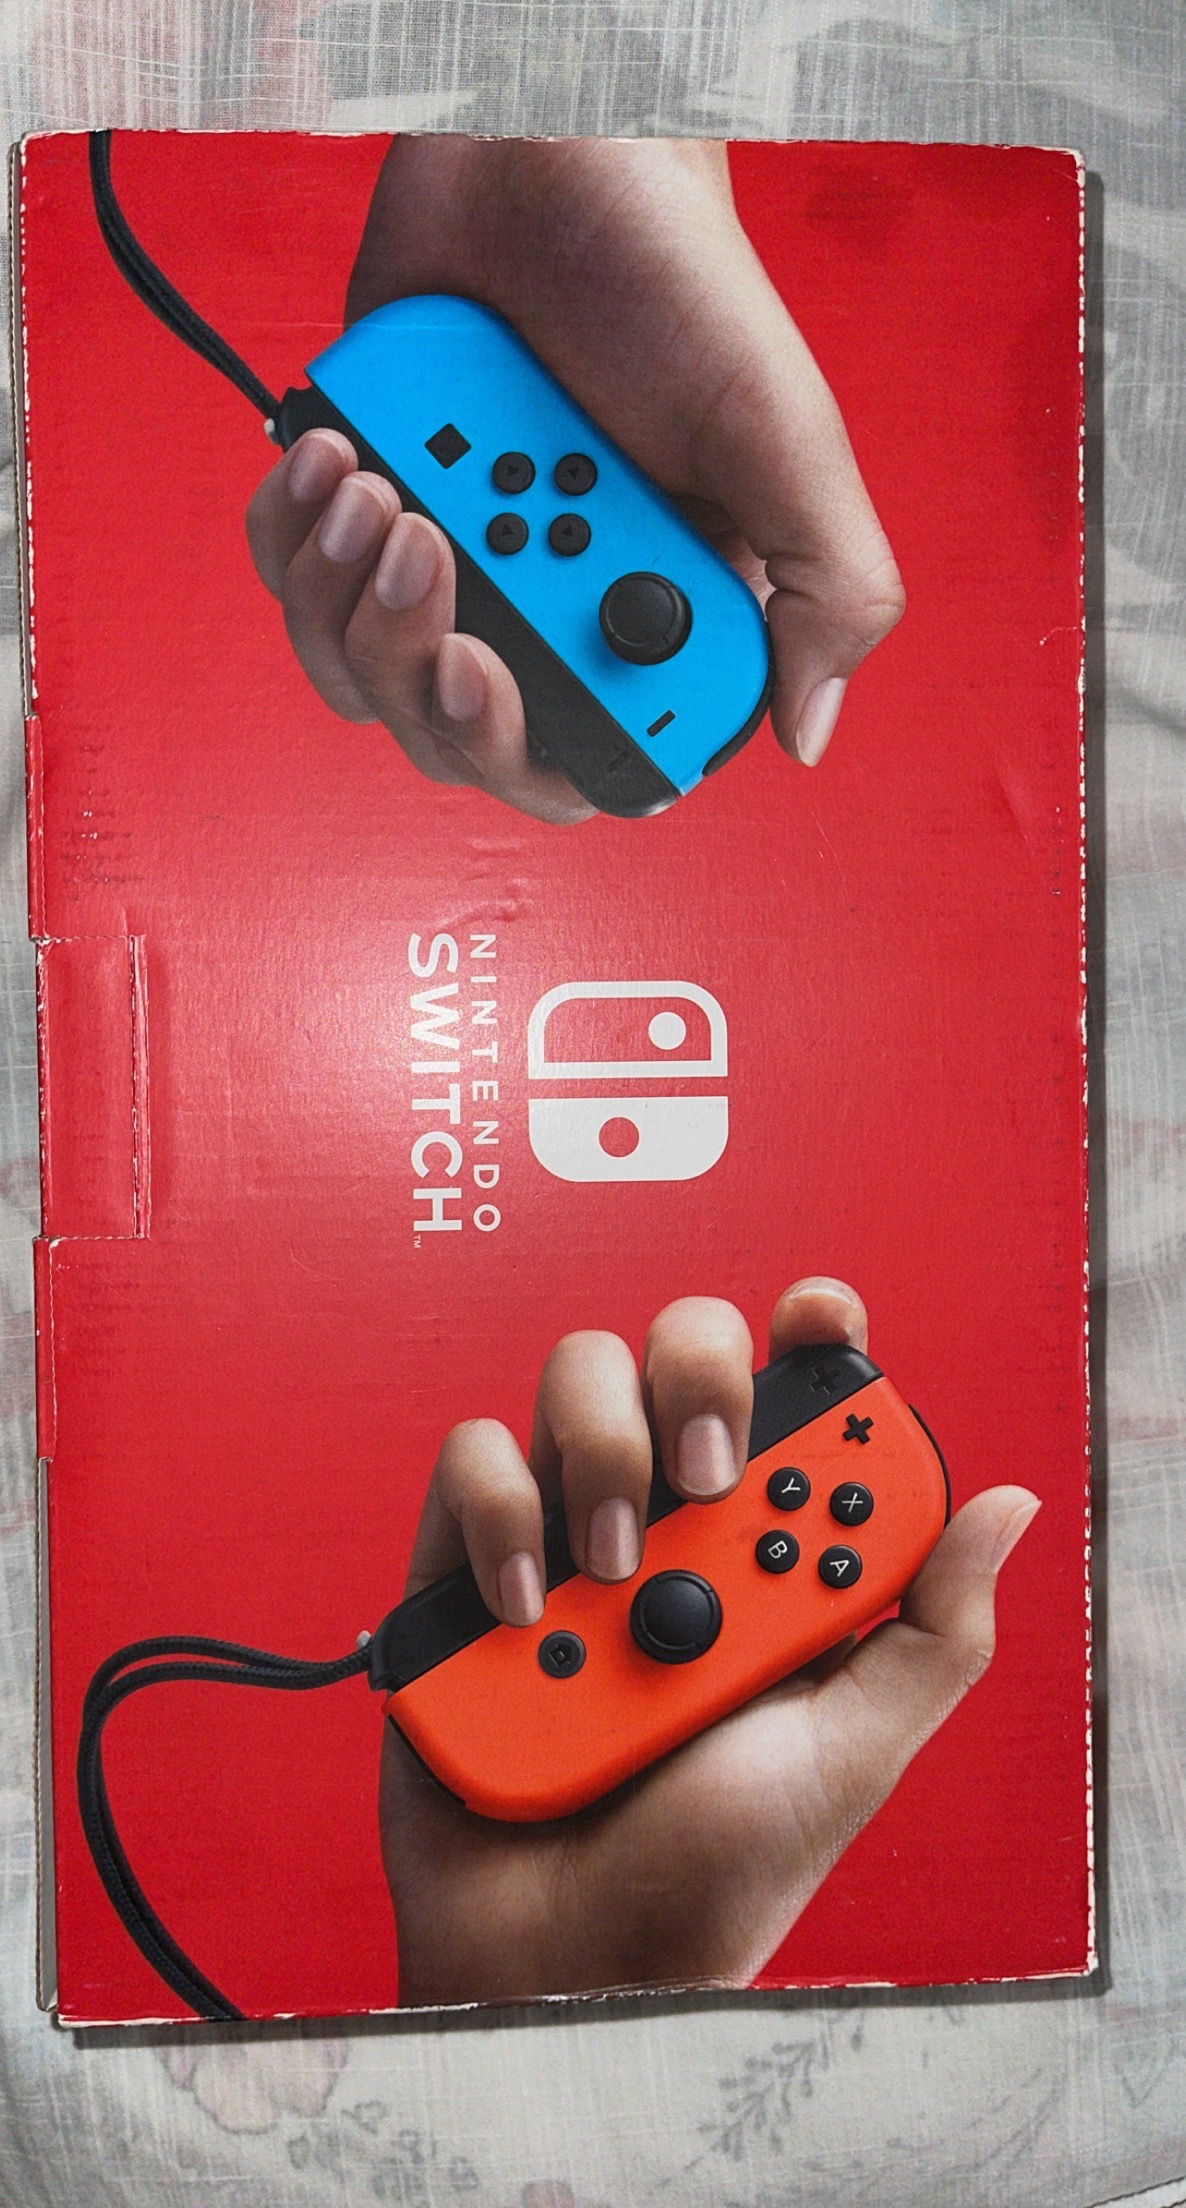 Nintendo Switch Gaming Console "Neon Blue/Red"